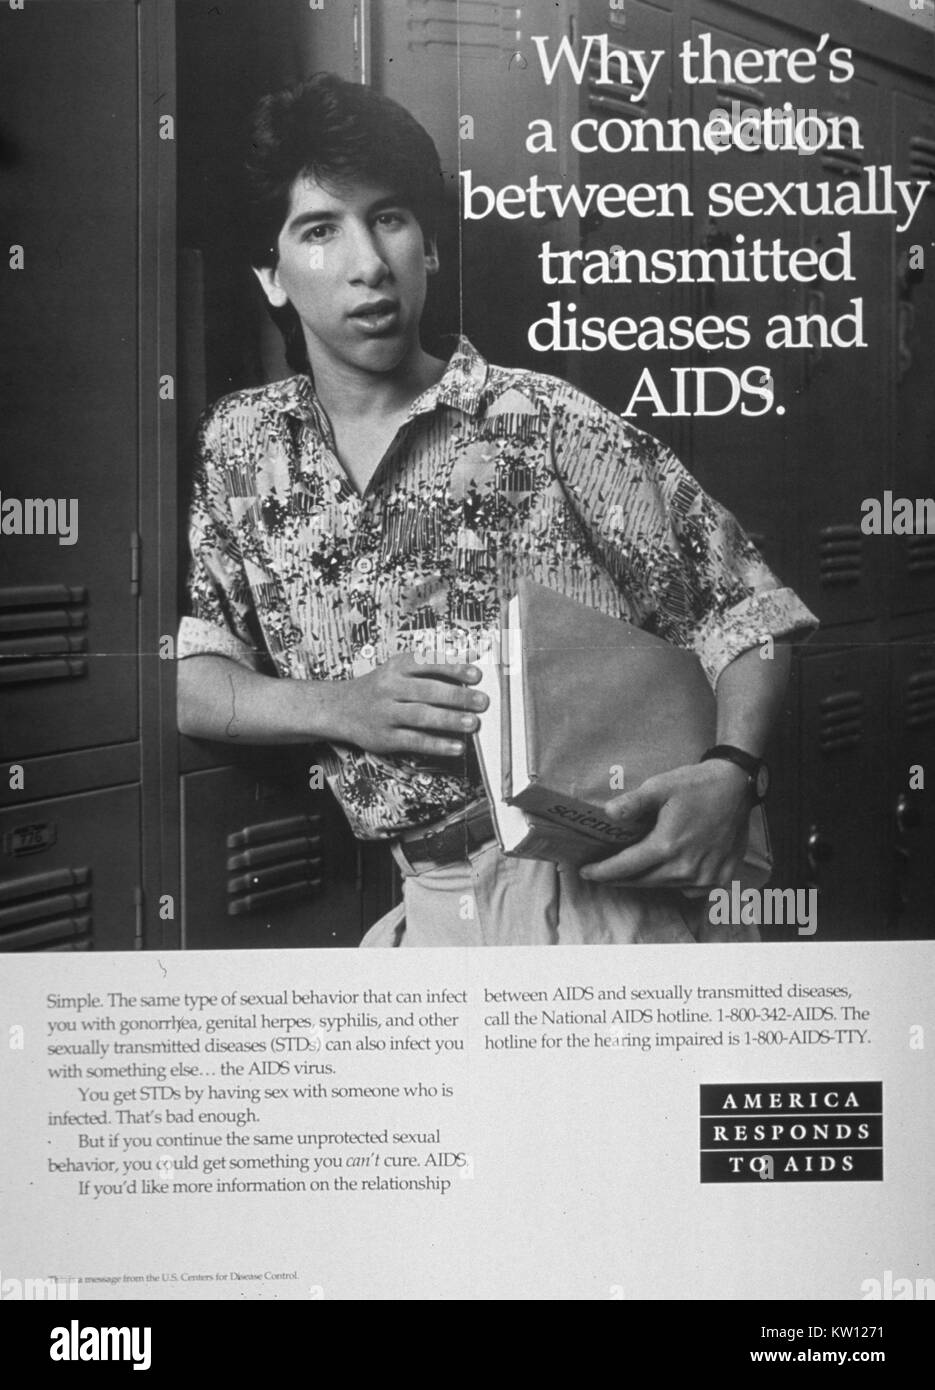 Public health poster regarding Acquired Immune Deficiency Syndrome (AIDS)/Human Immunodeficiency Virus (HIV). Image courtesy National Library of Medicine, 1990. Stock Photo